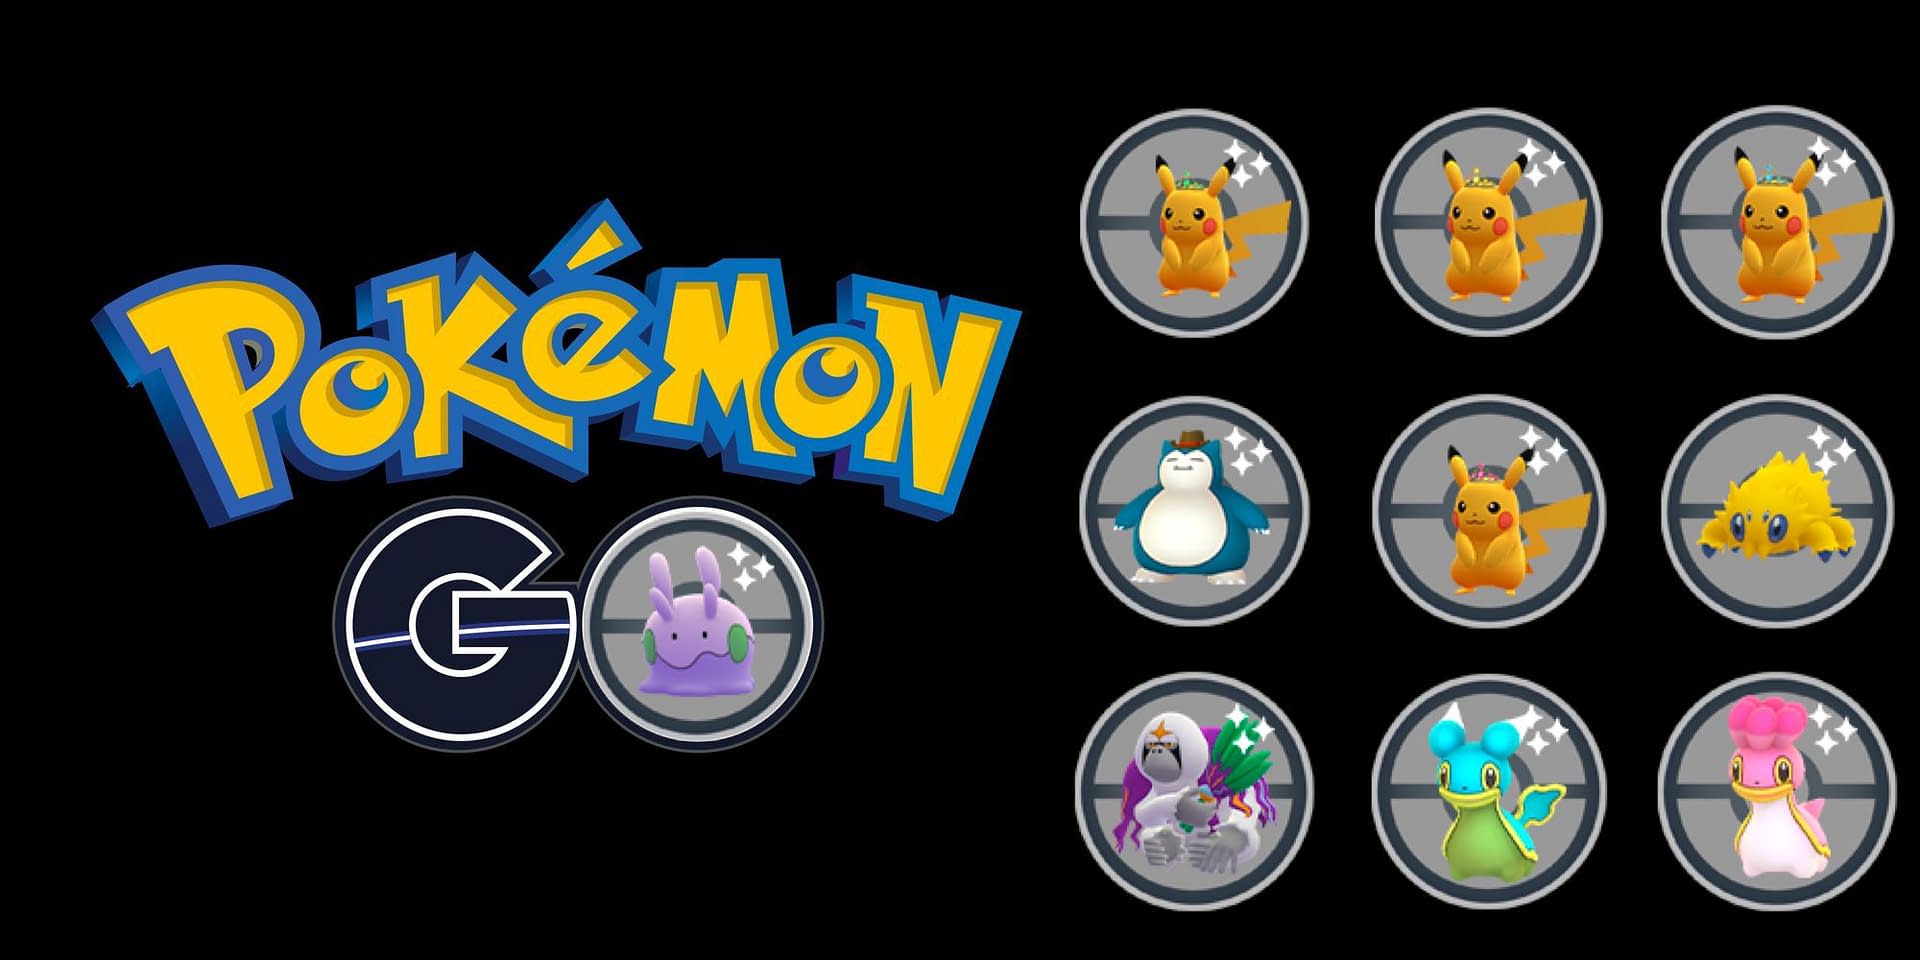 Meet the five new Gen 3 Pokemon coming to 'Pokemon Go' this weekend